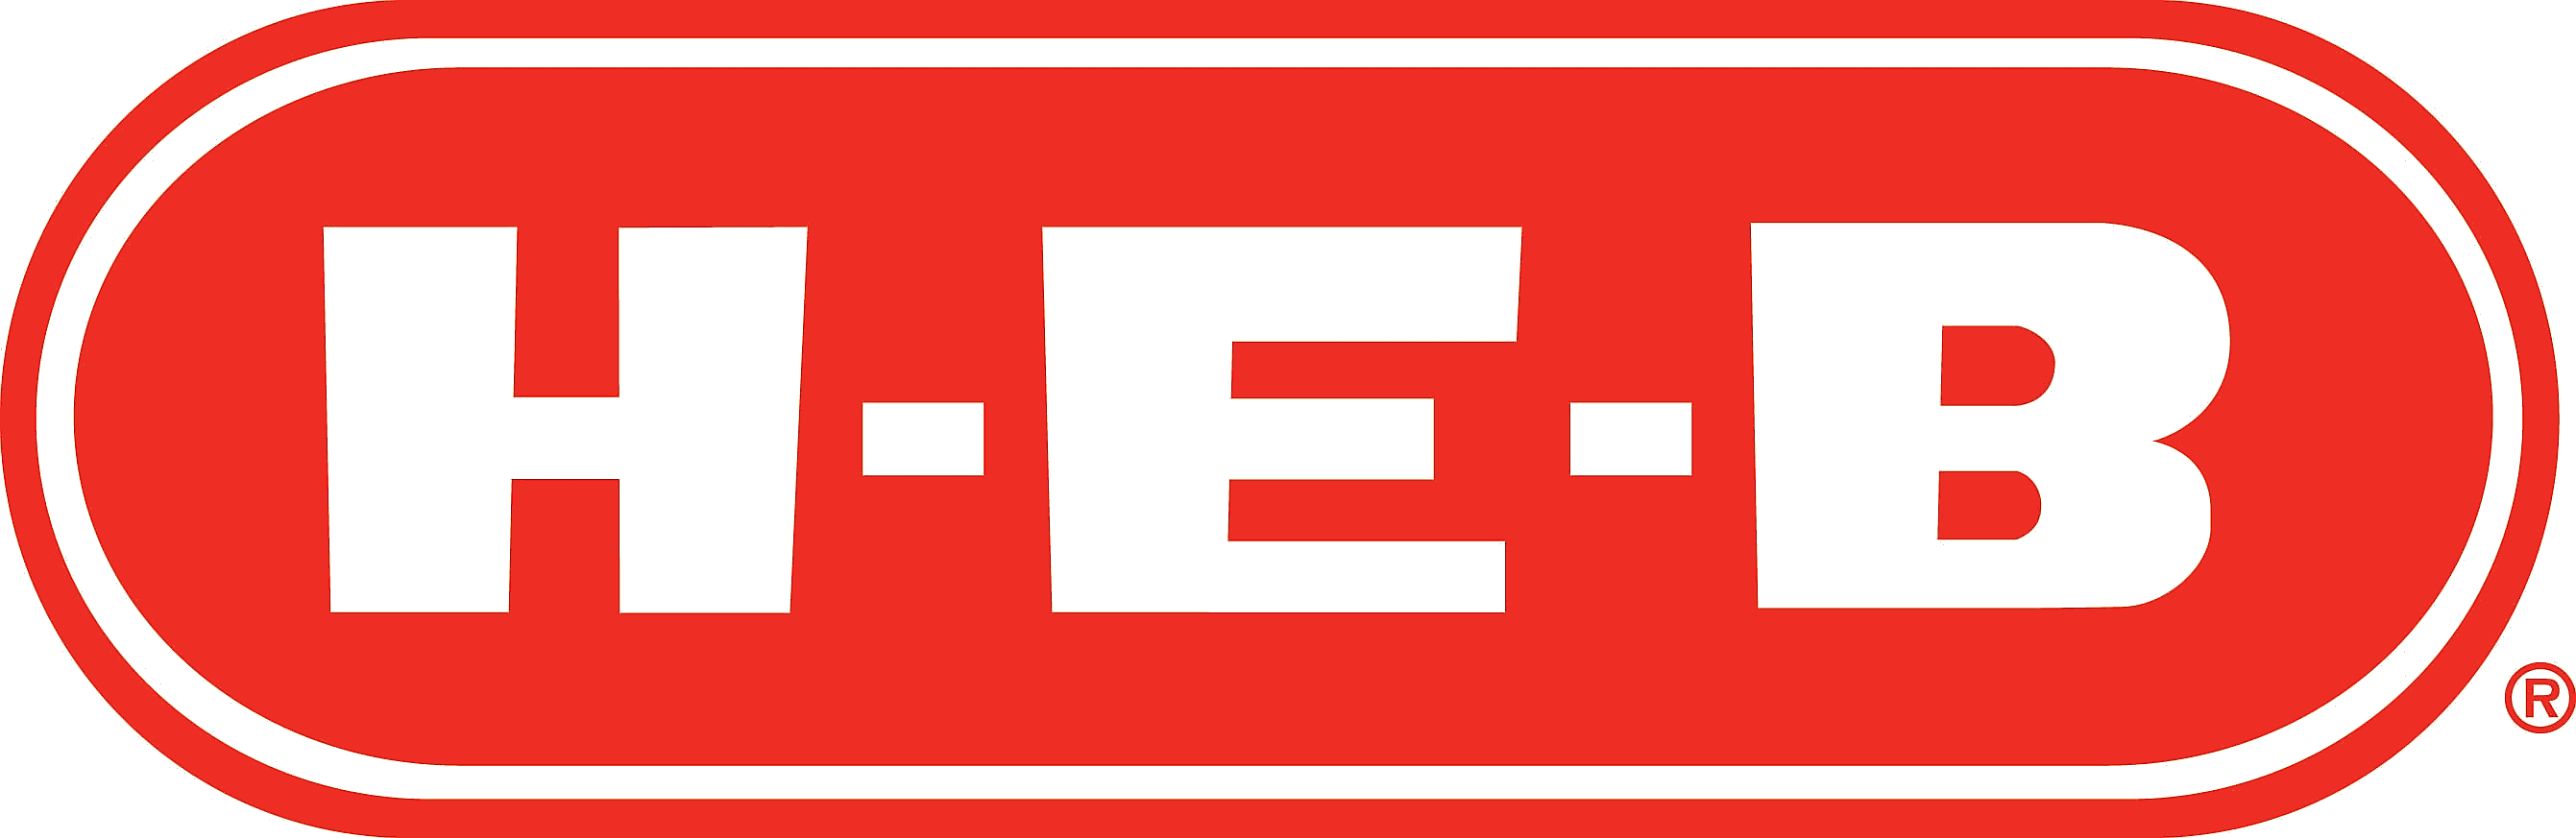 File:Logo of the HEB Grocery Company, LP.png - Wikipedia